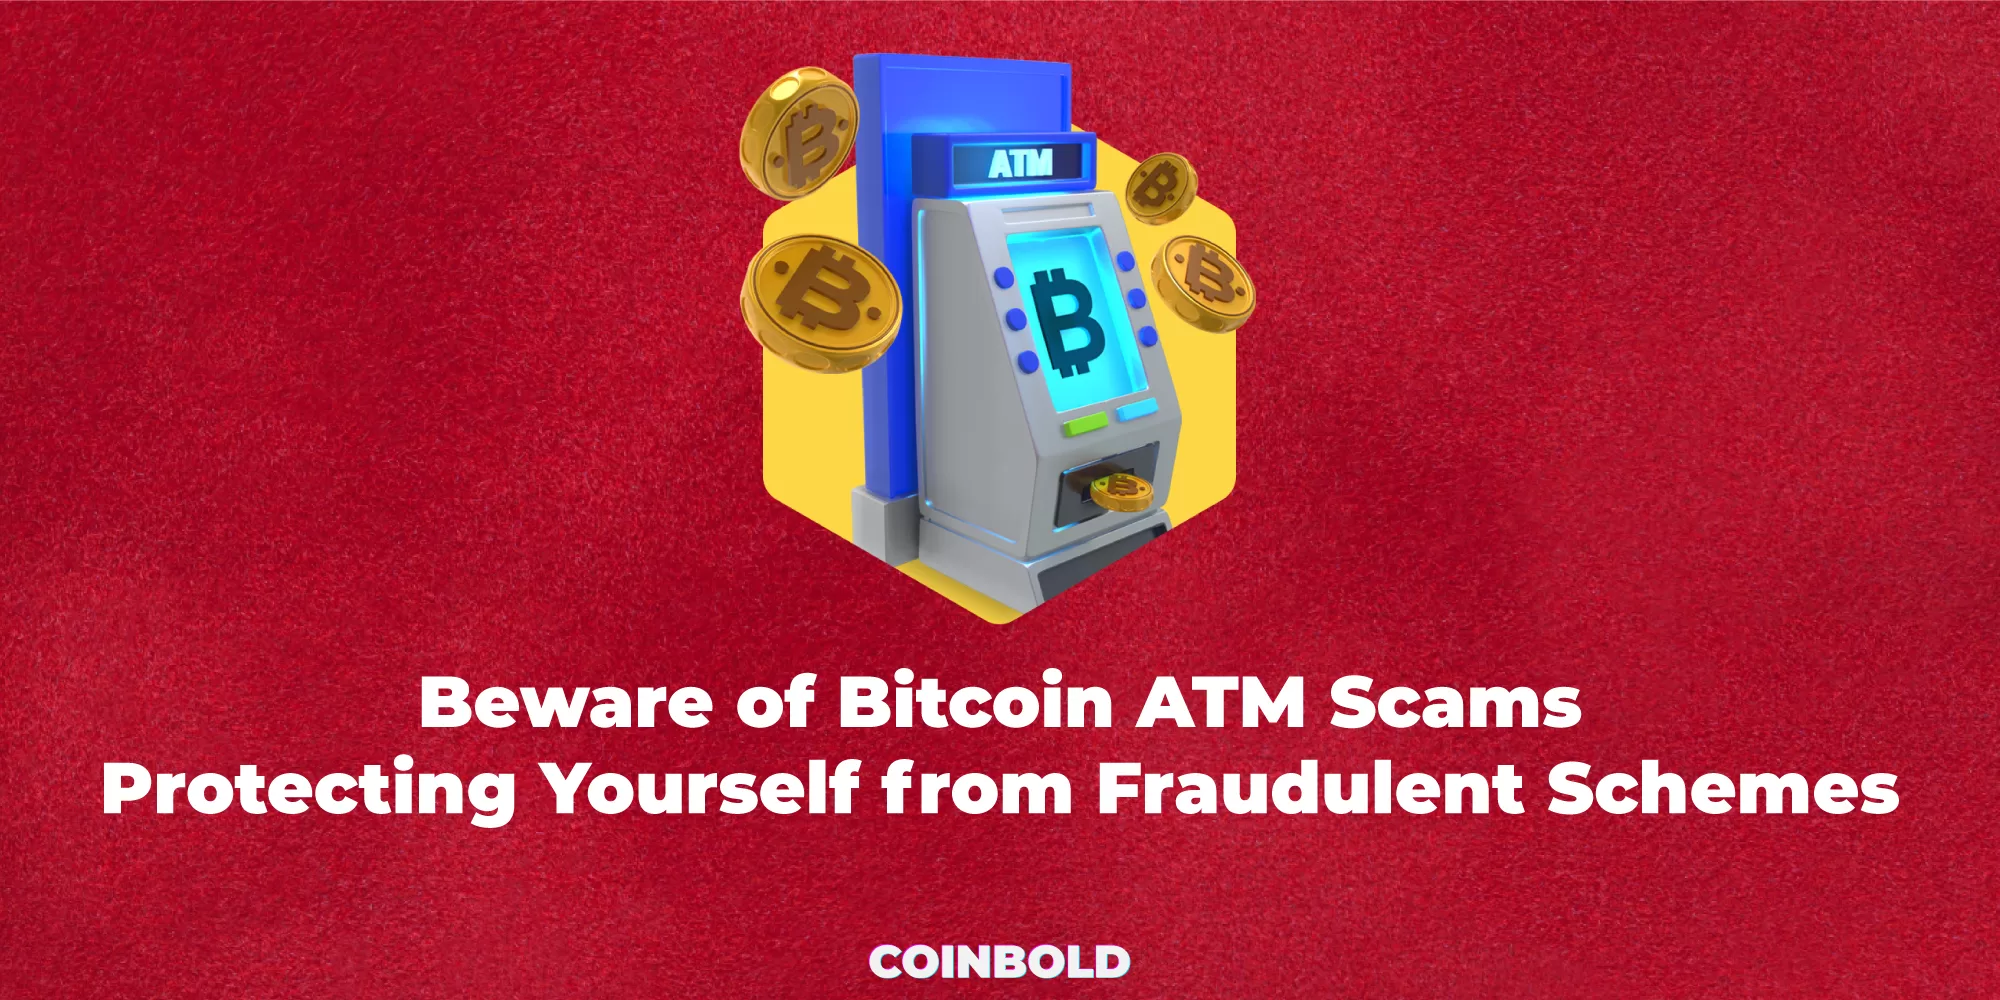 Beware of Bitcoin ATM Scams: Protecting Yourself from Fraudulent Schemes